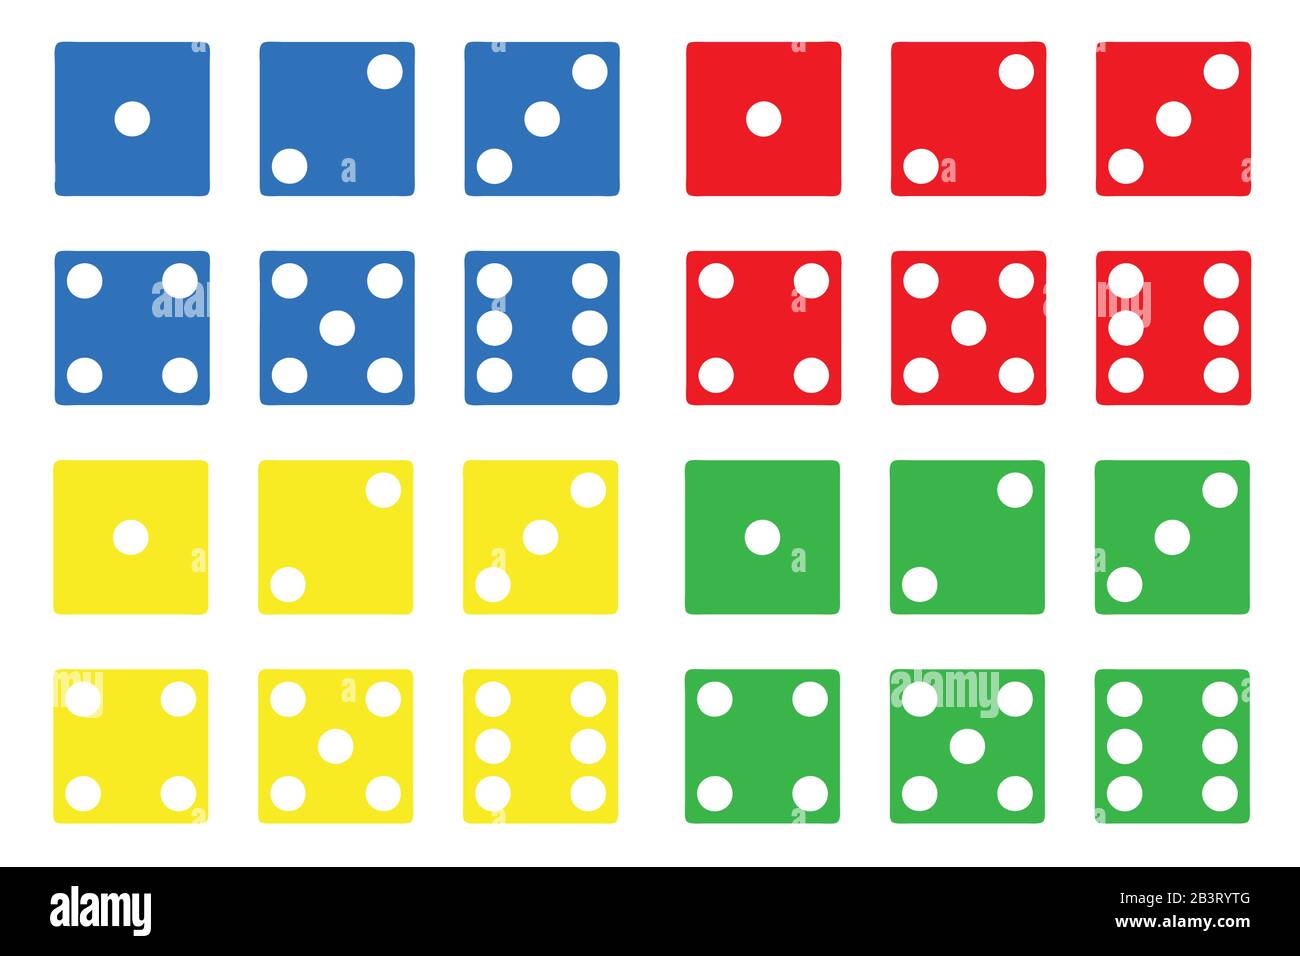 Illustration of color dice isolated on white Stock Vector